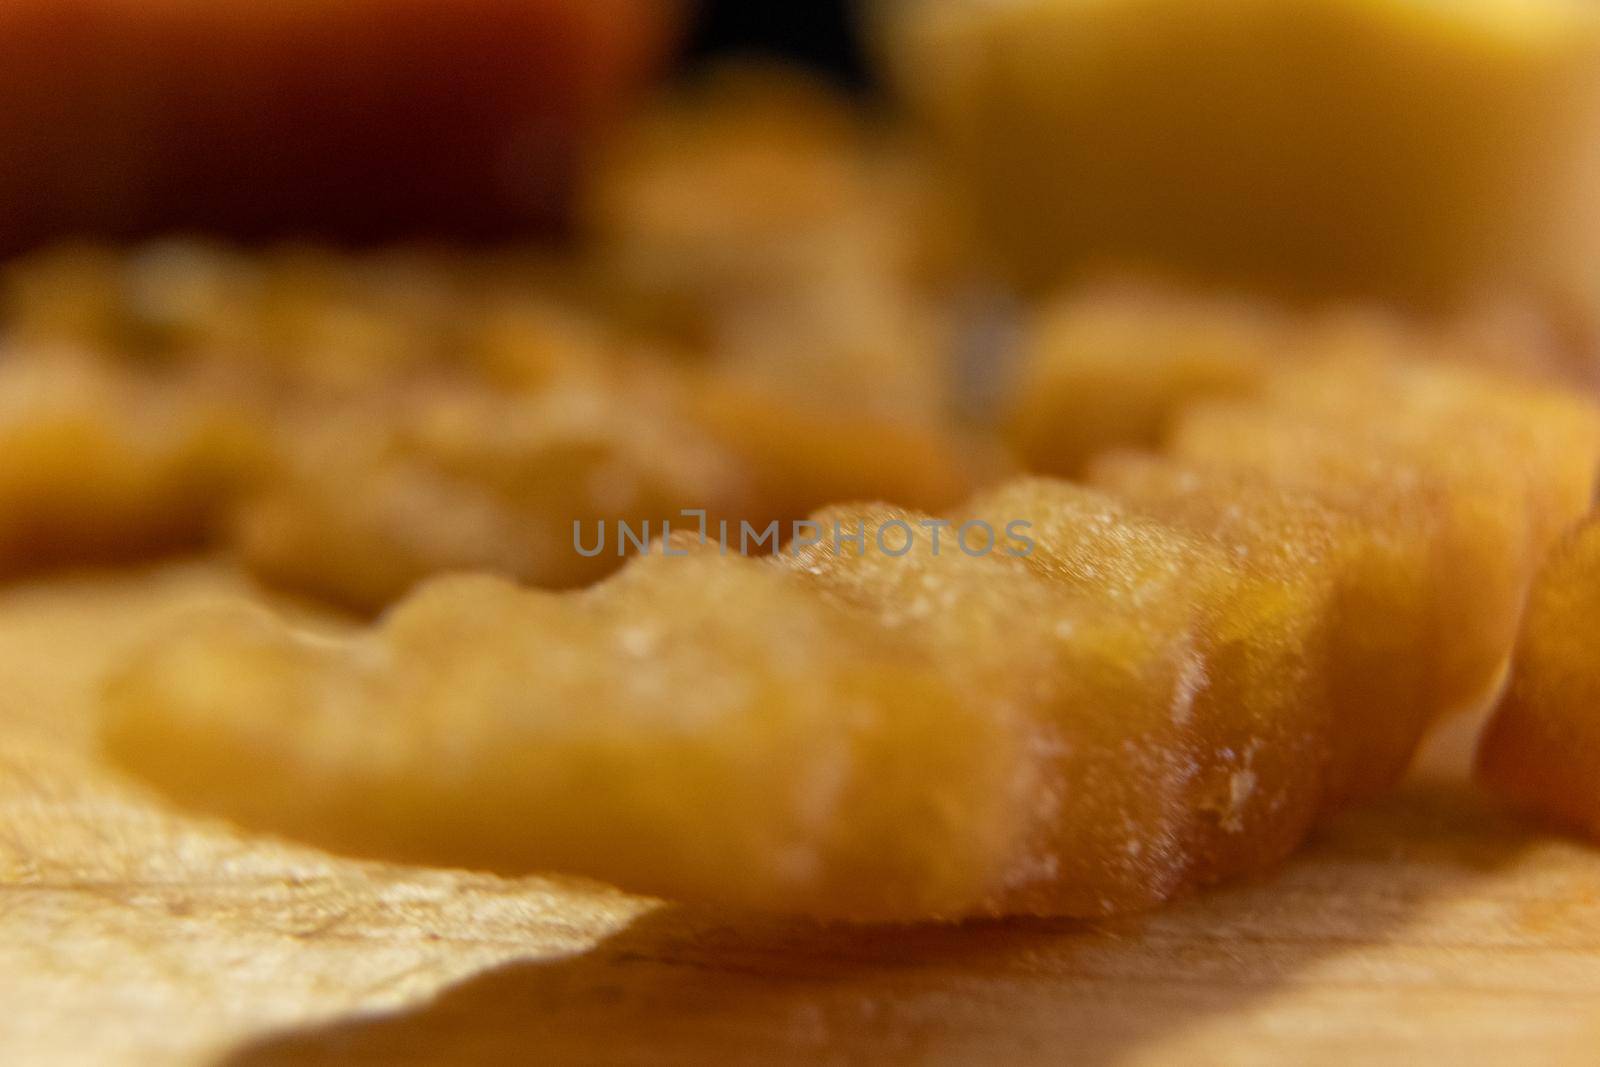 Wavy fry on wooden surface with blurry ketchup and melted cheese as background by Kanelbulle